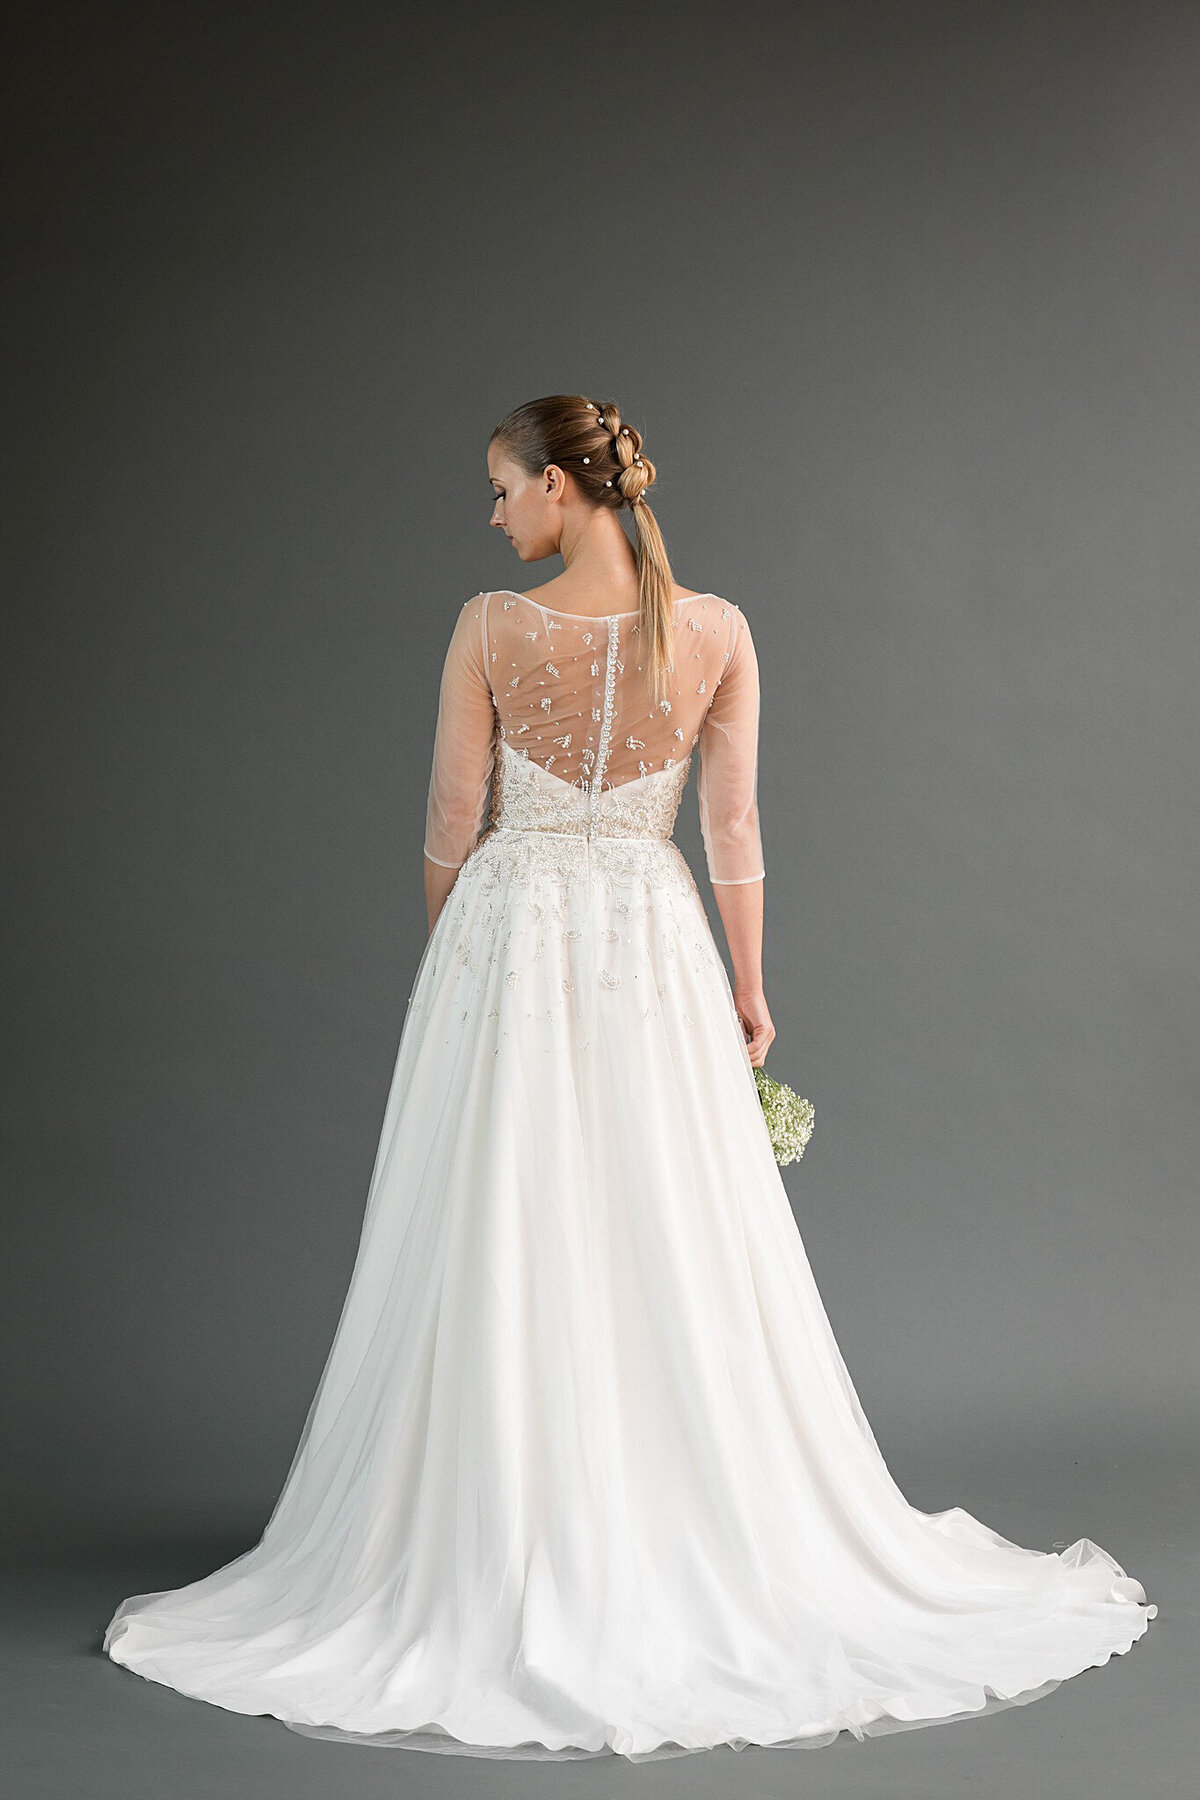 The back view of the Rei wedding dress style which has an a-line skirt, illusion neckline, and sheer three-quarter sleeves.